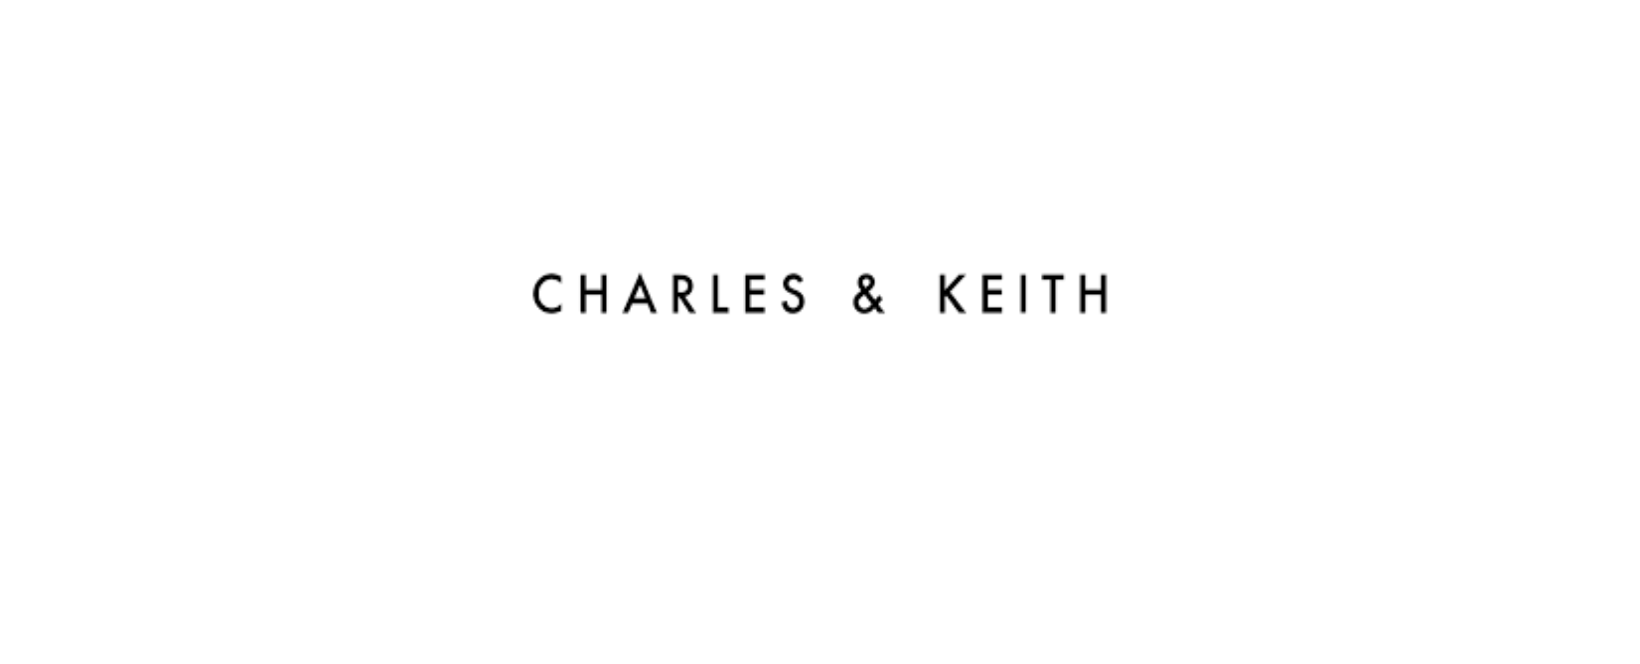 Charles & Keith Discount Code 2022